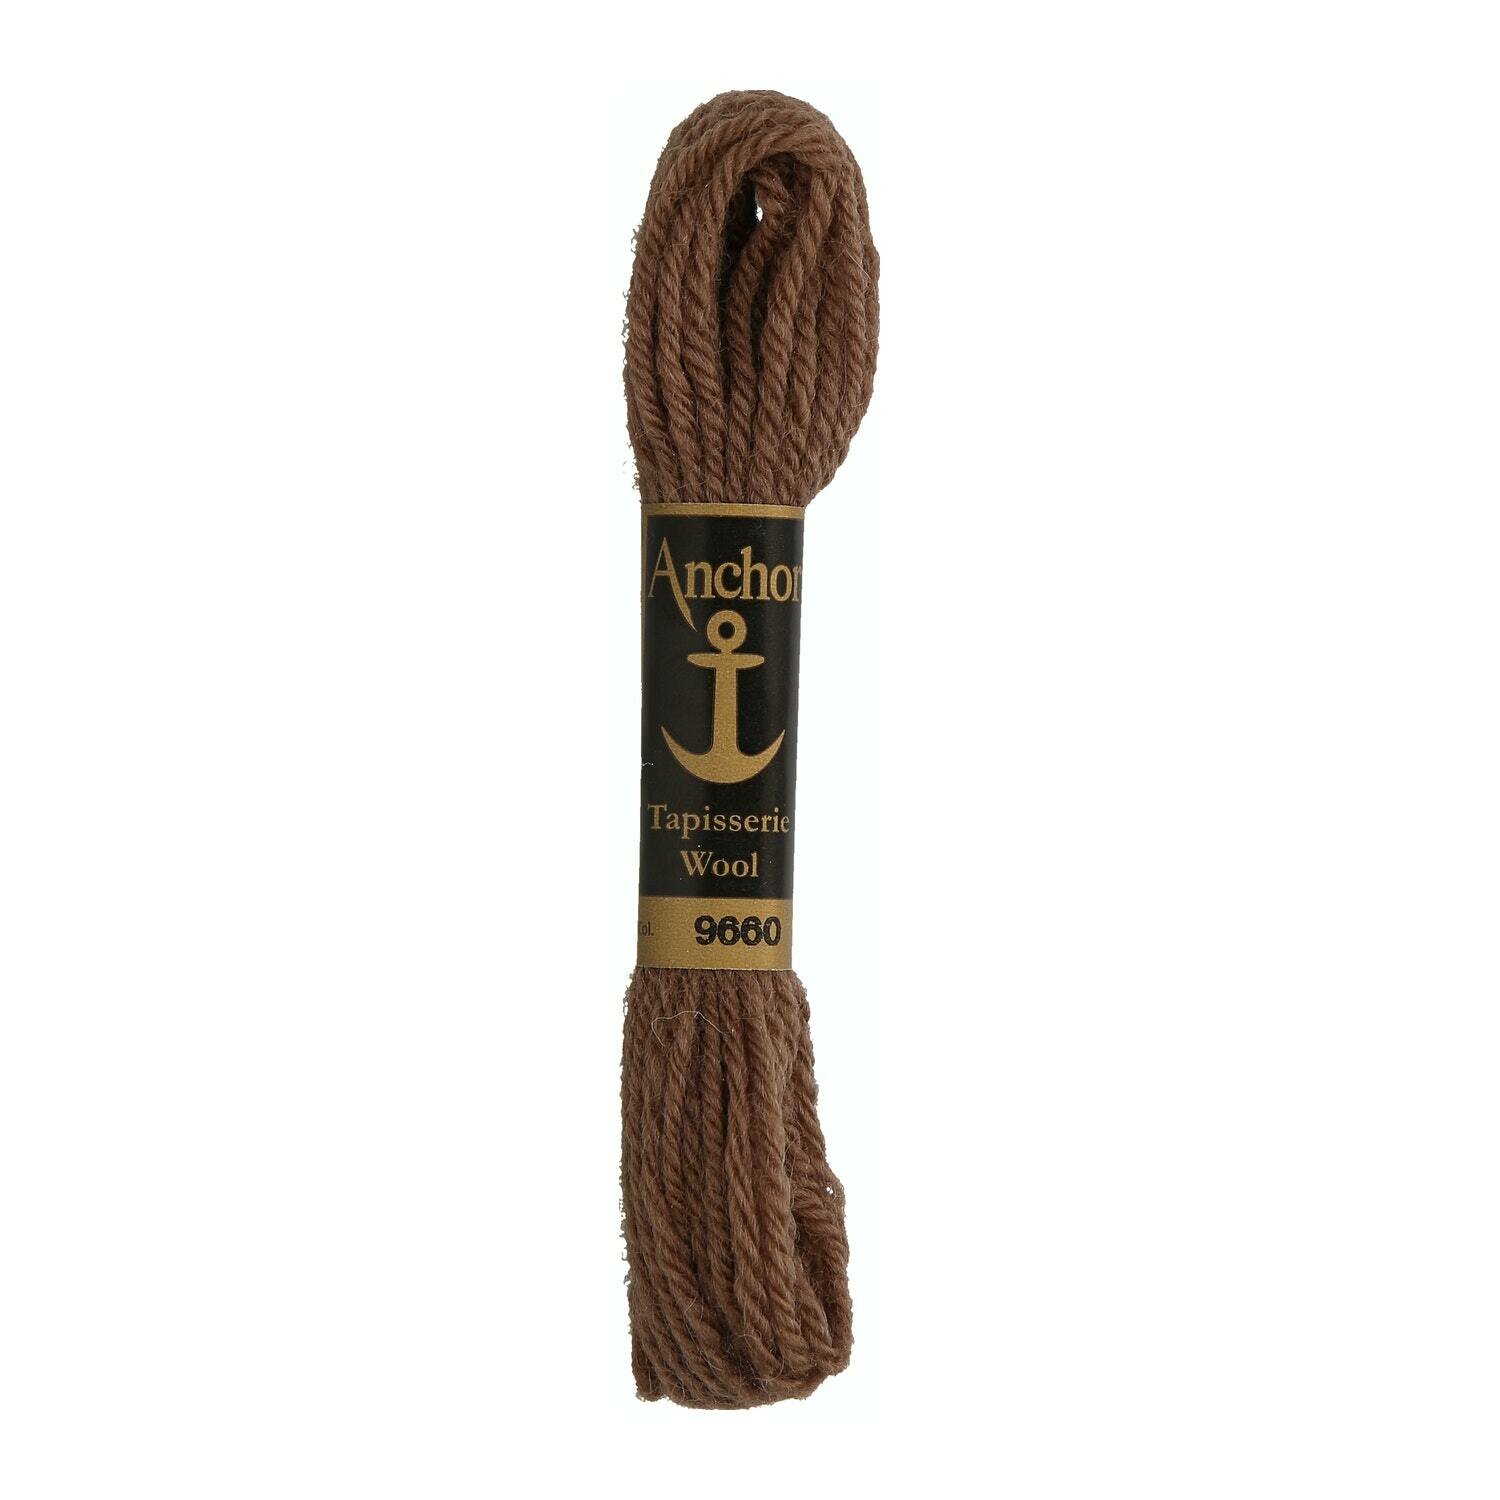 Anchor Tapisserie Wool # 09660